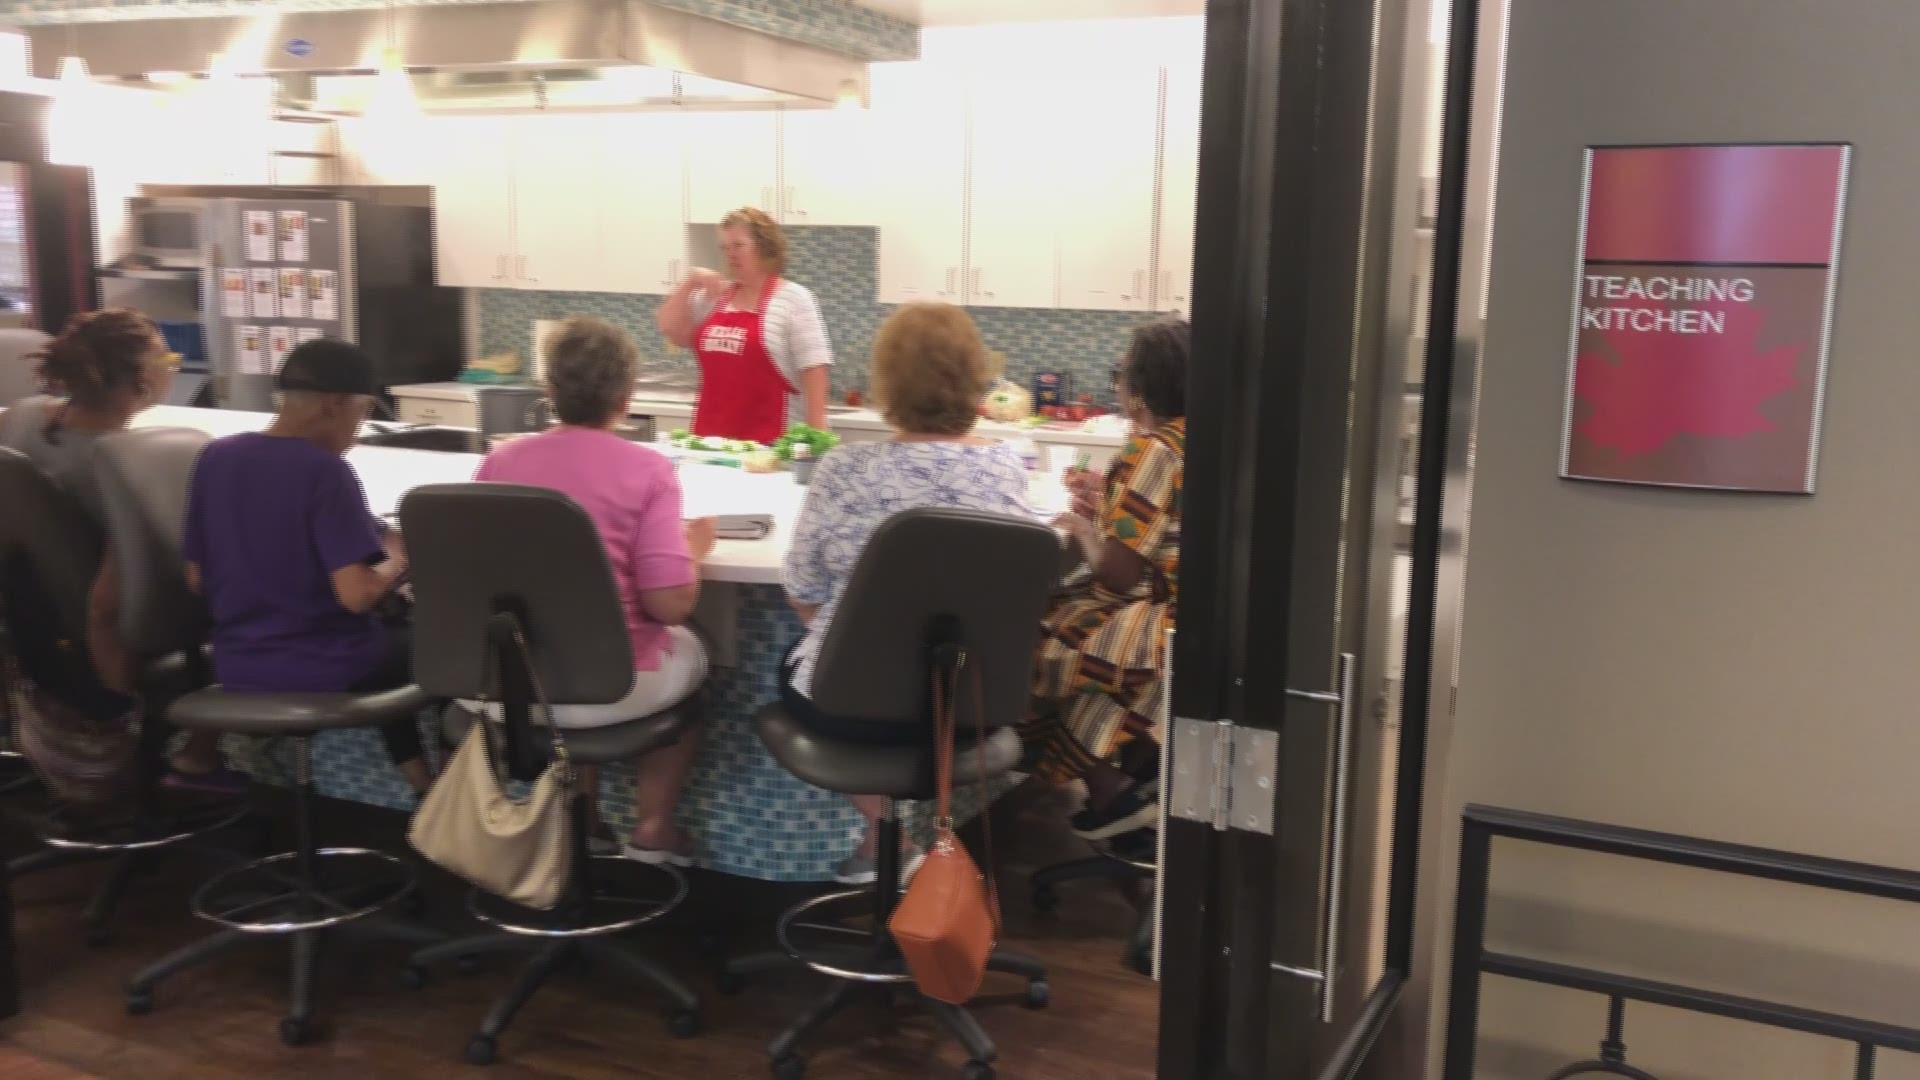 A unique cooking class was recently offered to Cobb Co. residents, and just in time for the hottest days of the year.